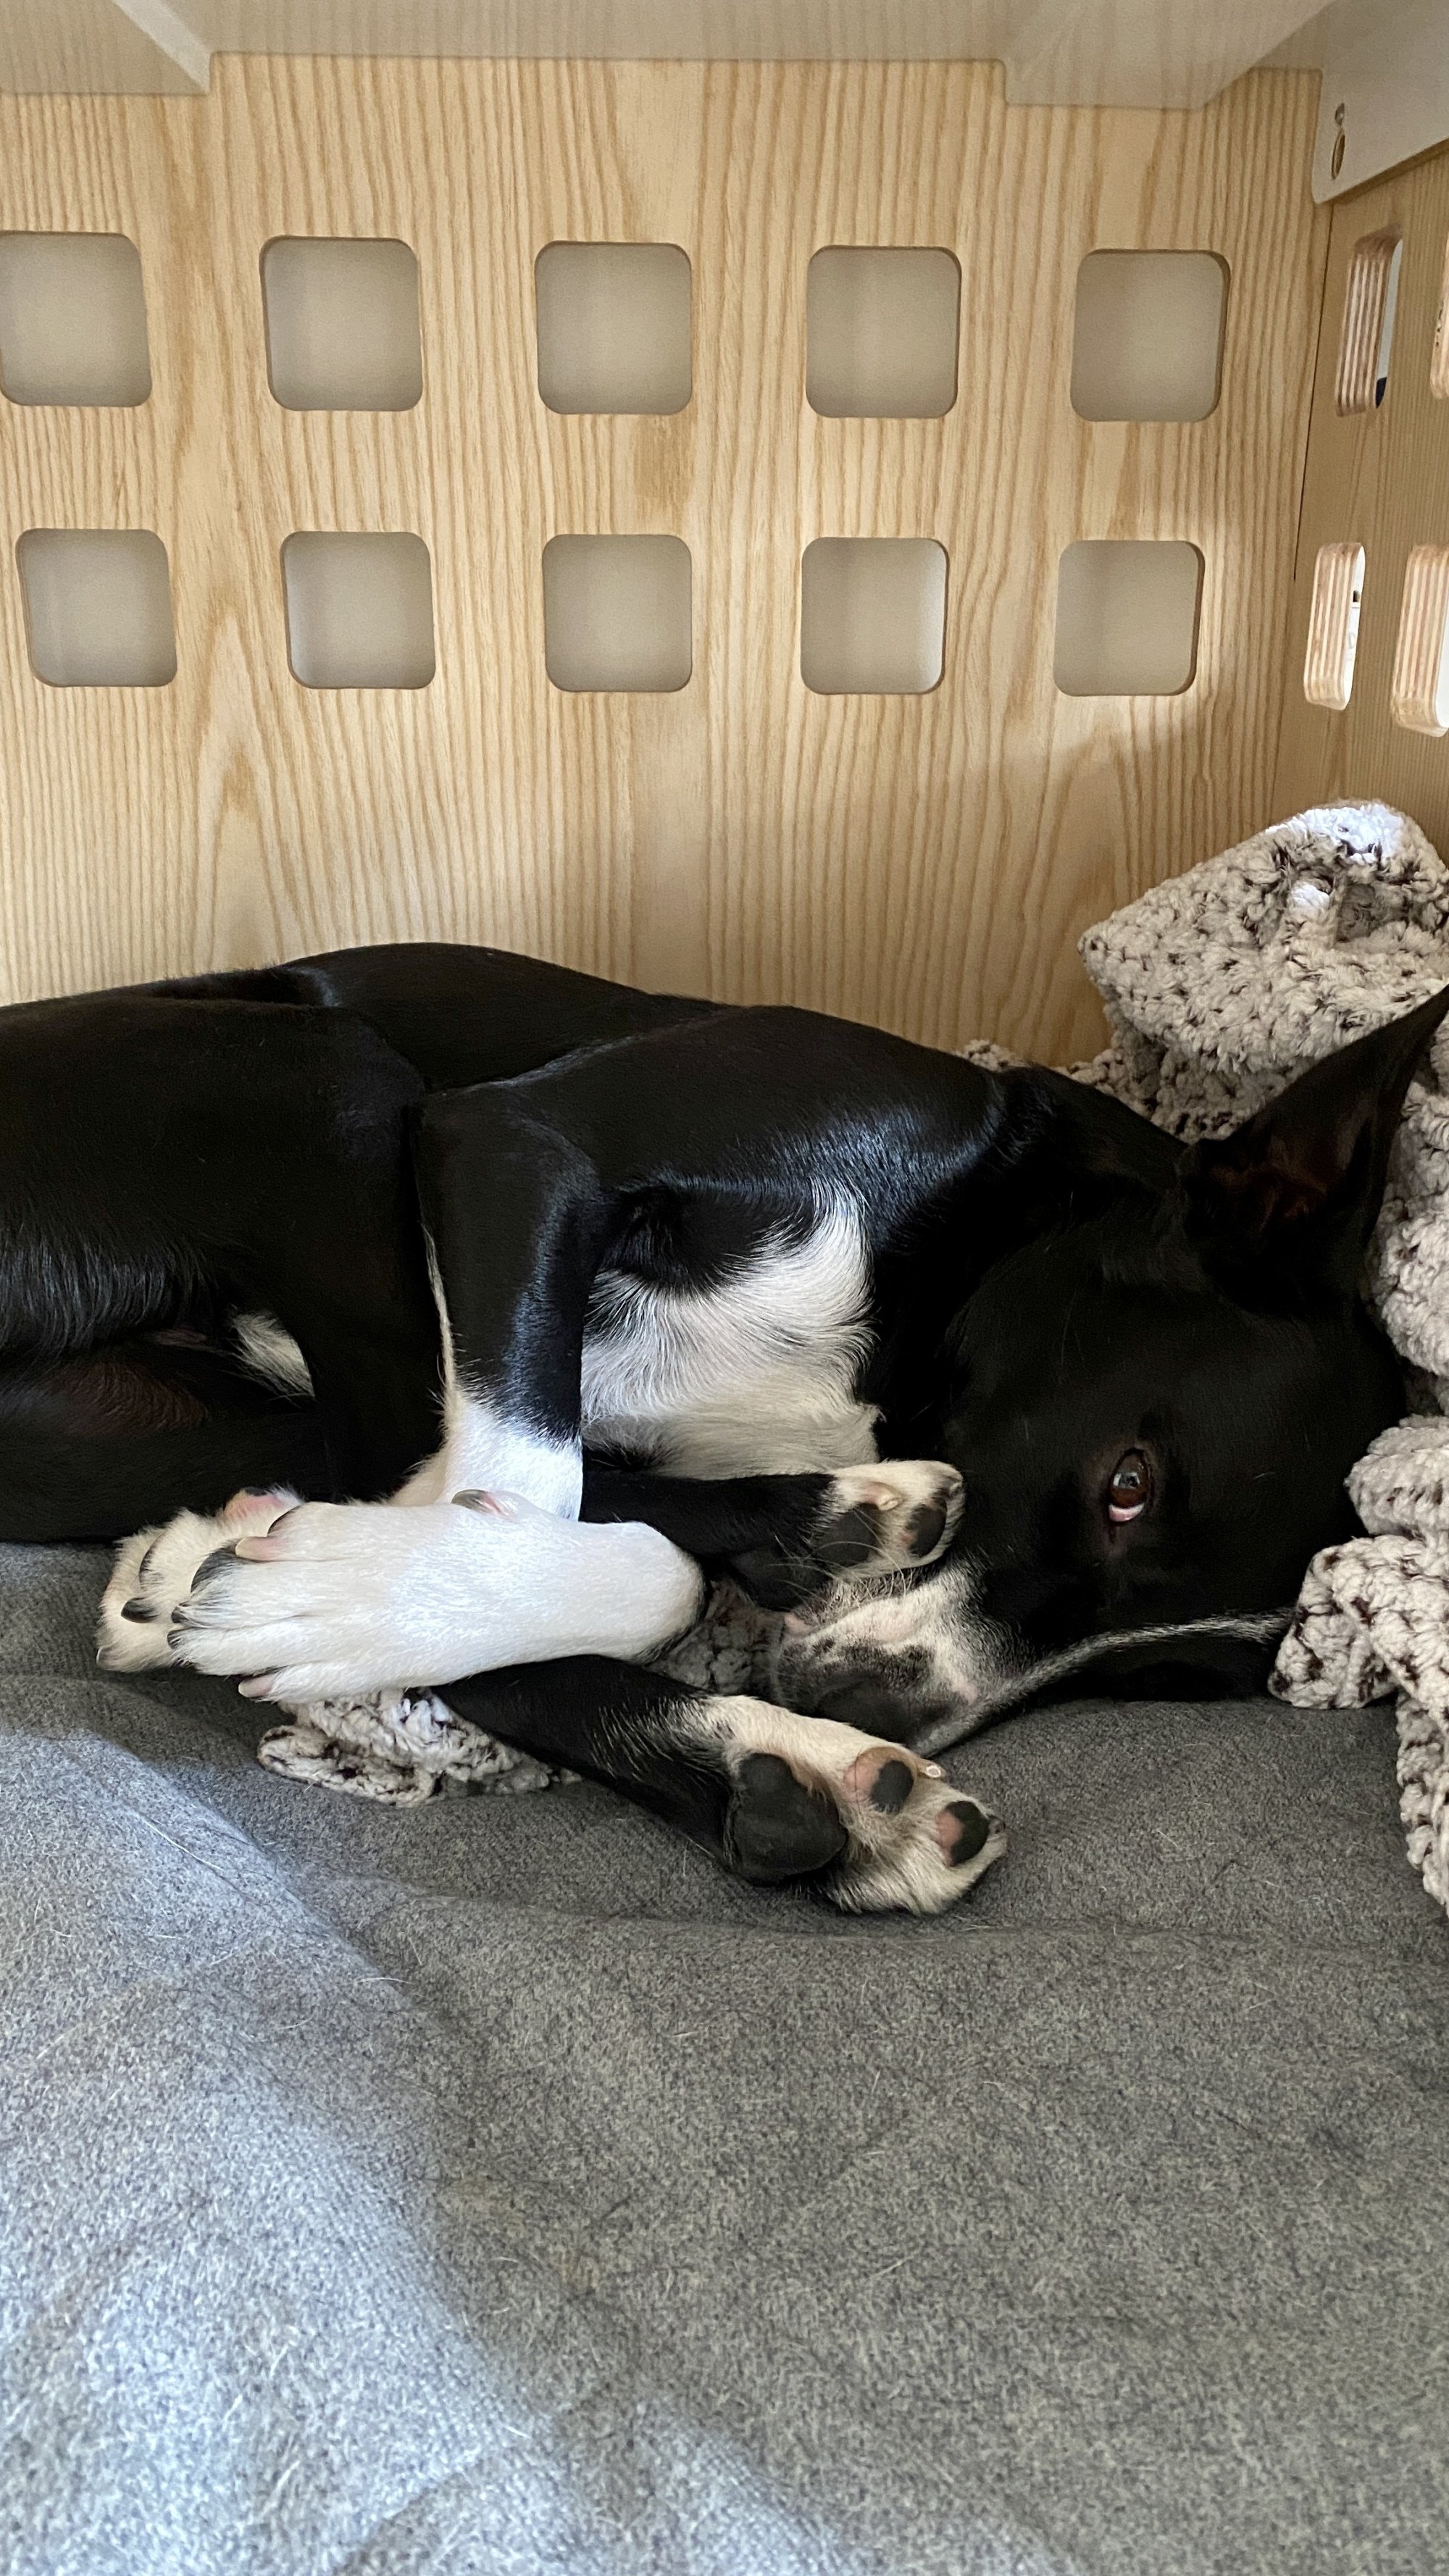 Black and white dog curled up in a wooden dog crate